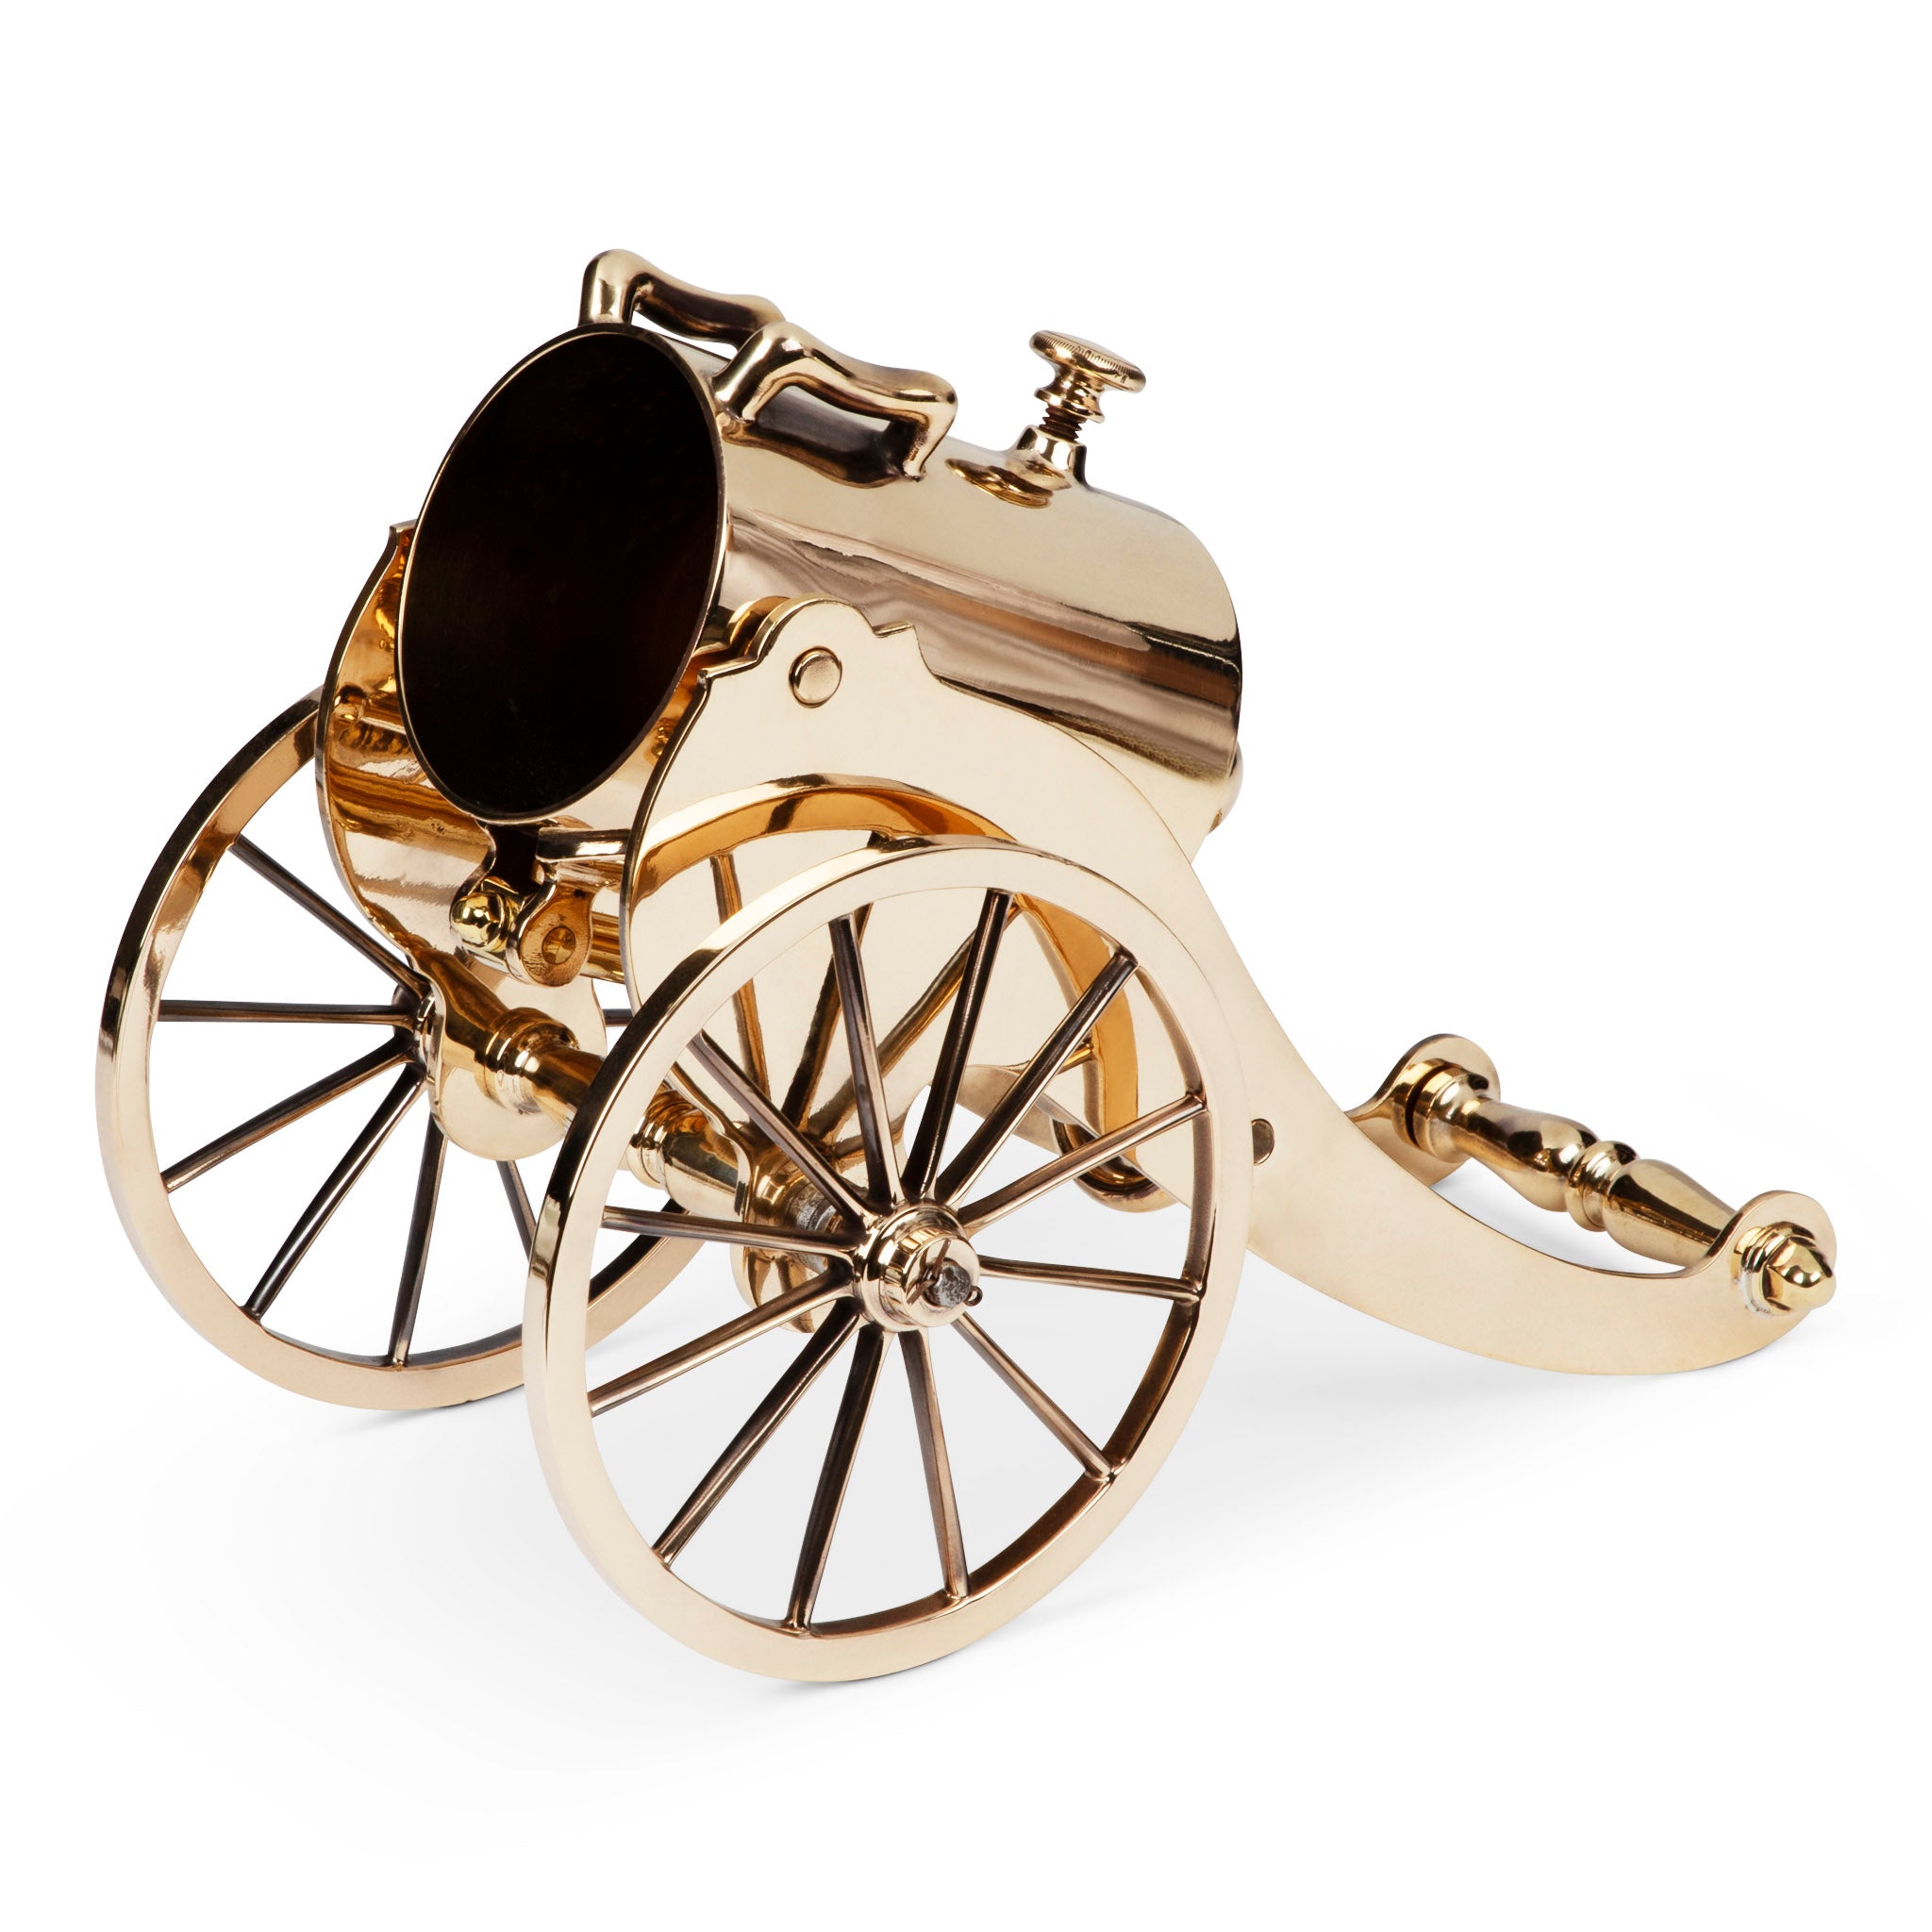 Artillery Cannon Mechanical Wine Chariot Cradle 